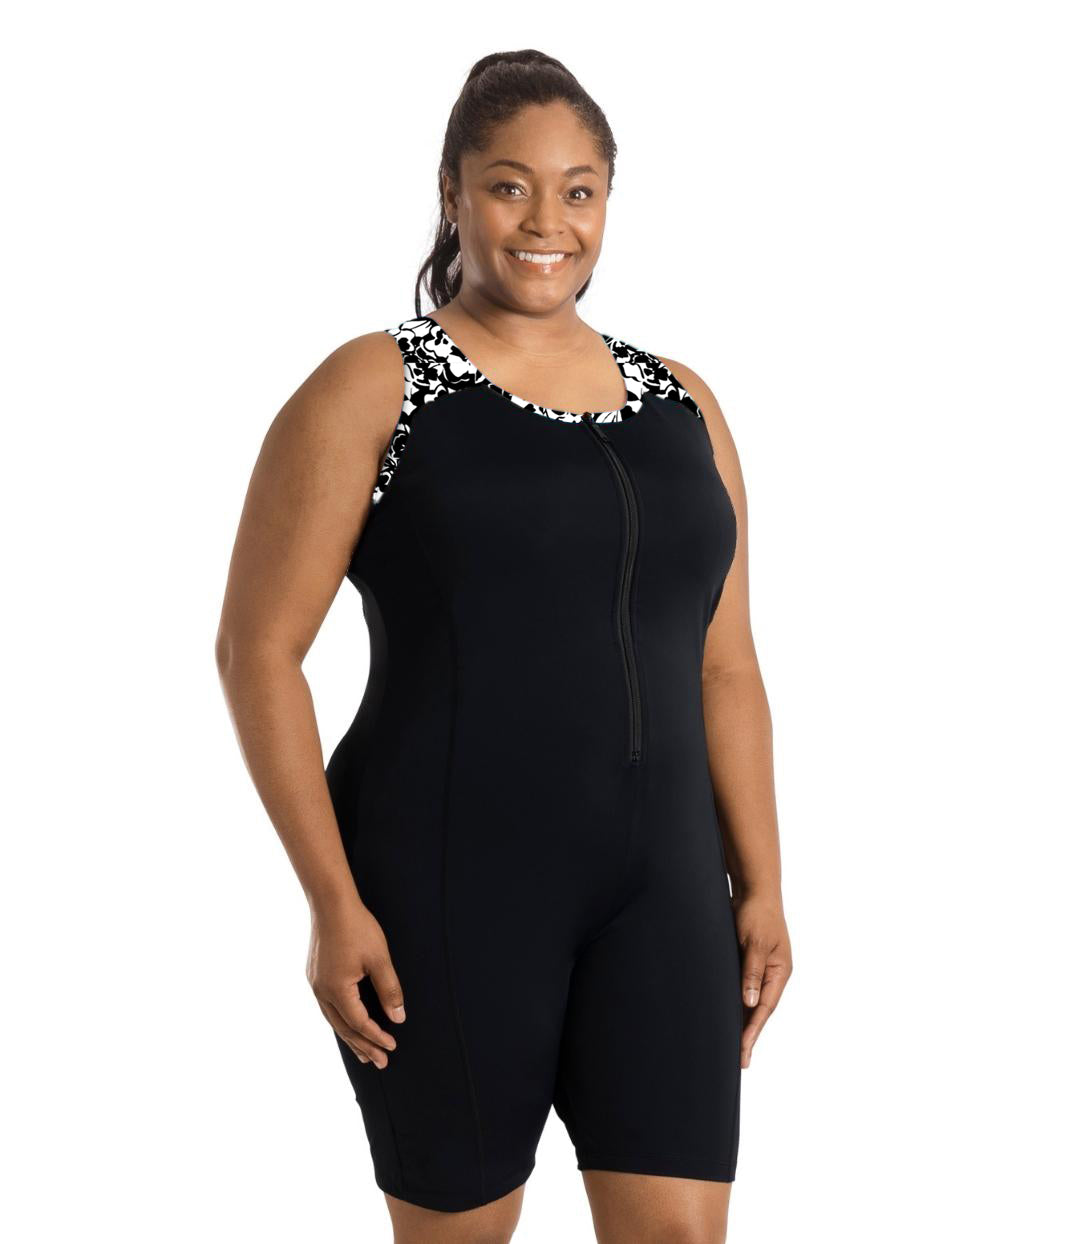 Plus size woman, facing front, wearing JunoActive plus size QuikEnergy Racerback Zip Front Aquatard Hibiscus print. Neck binding, armhole binding, and front shoulder blocking is a black and white print. The main body of the suit is solid black, has a black zipper in front. The leg hits a few inches above the knee.